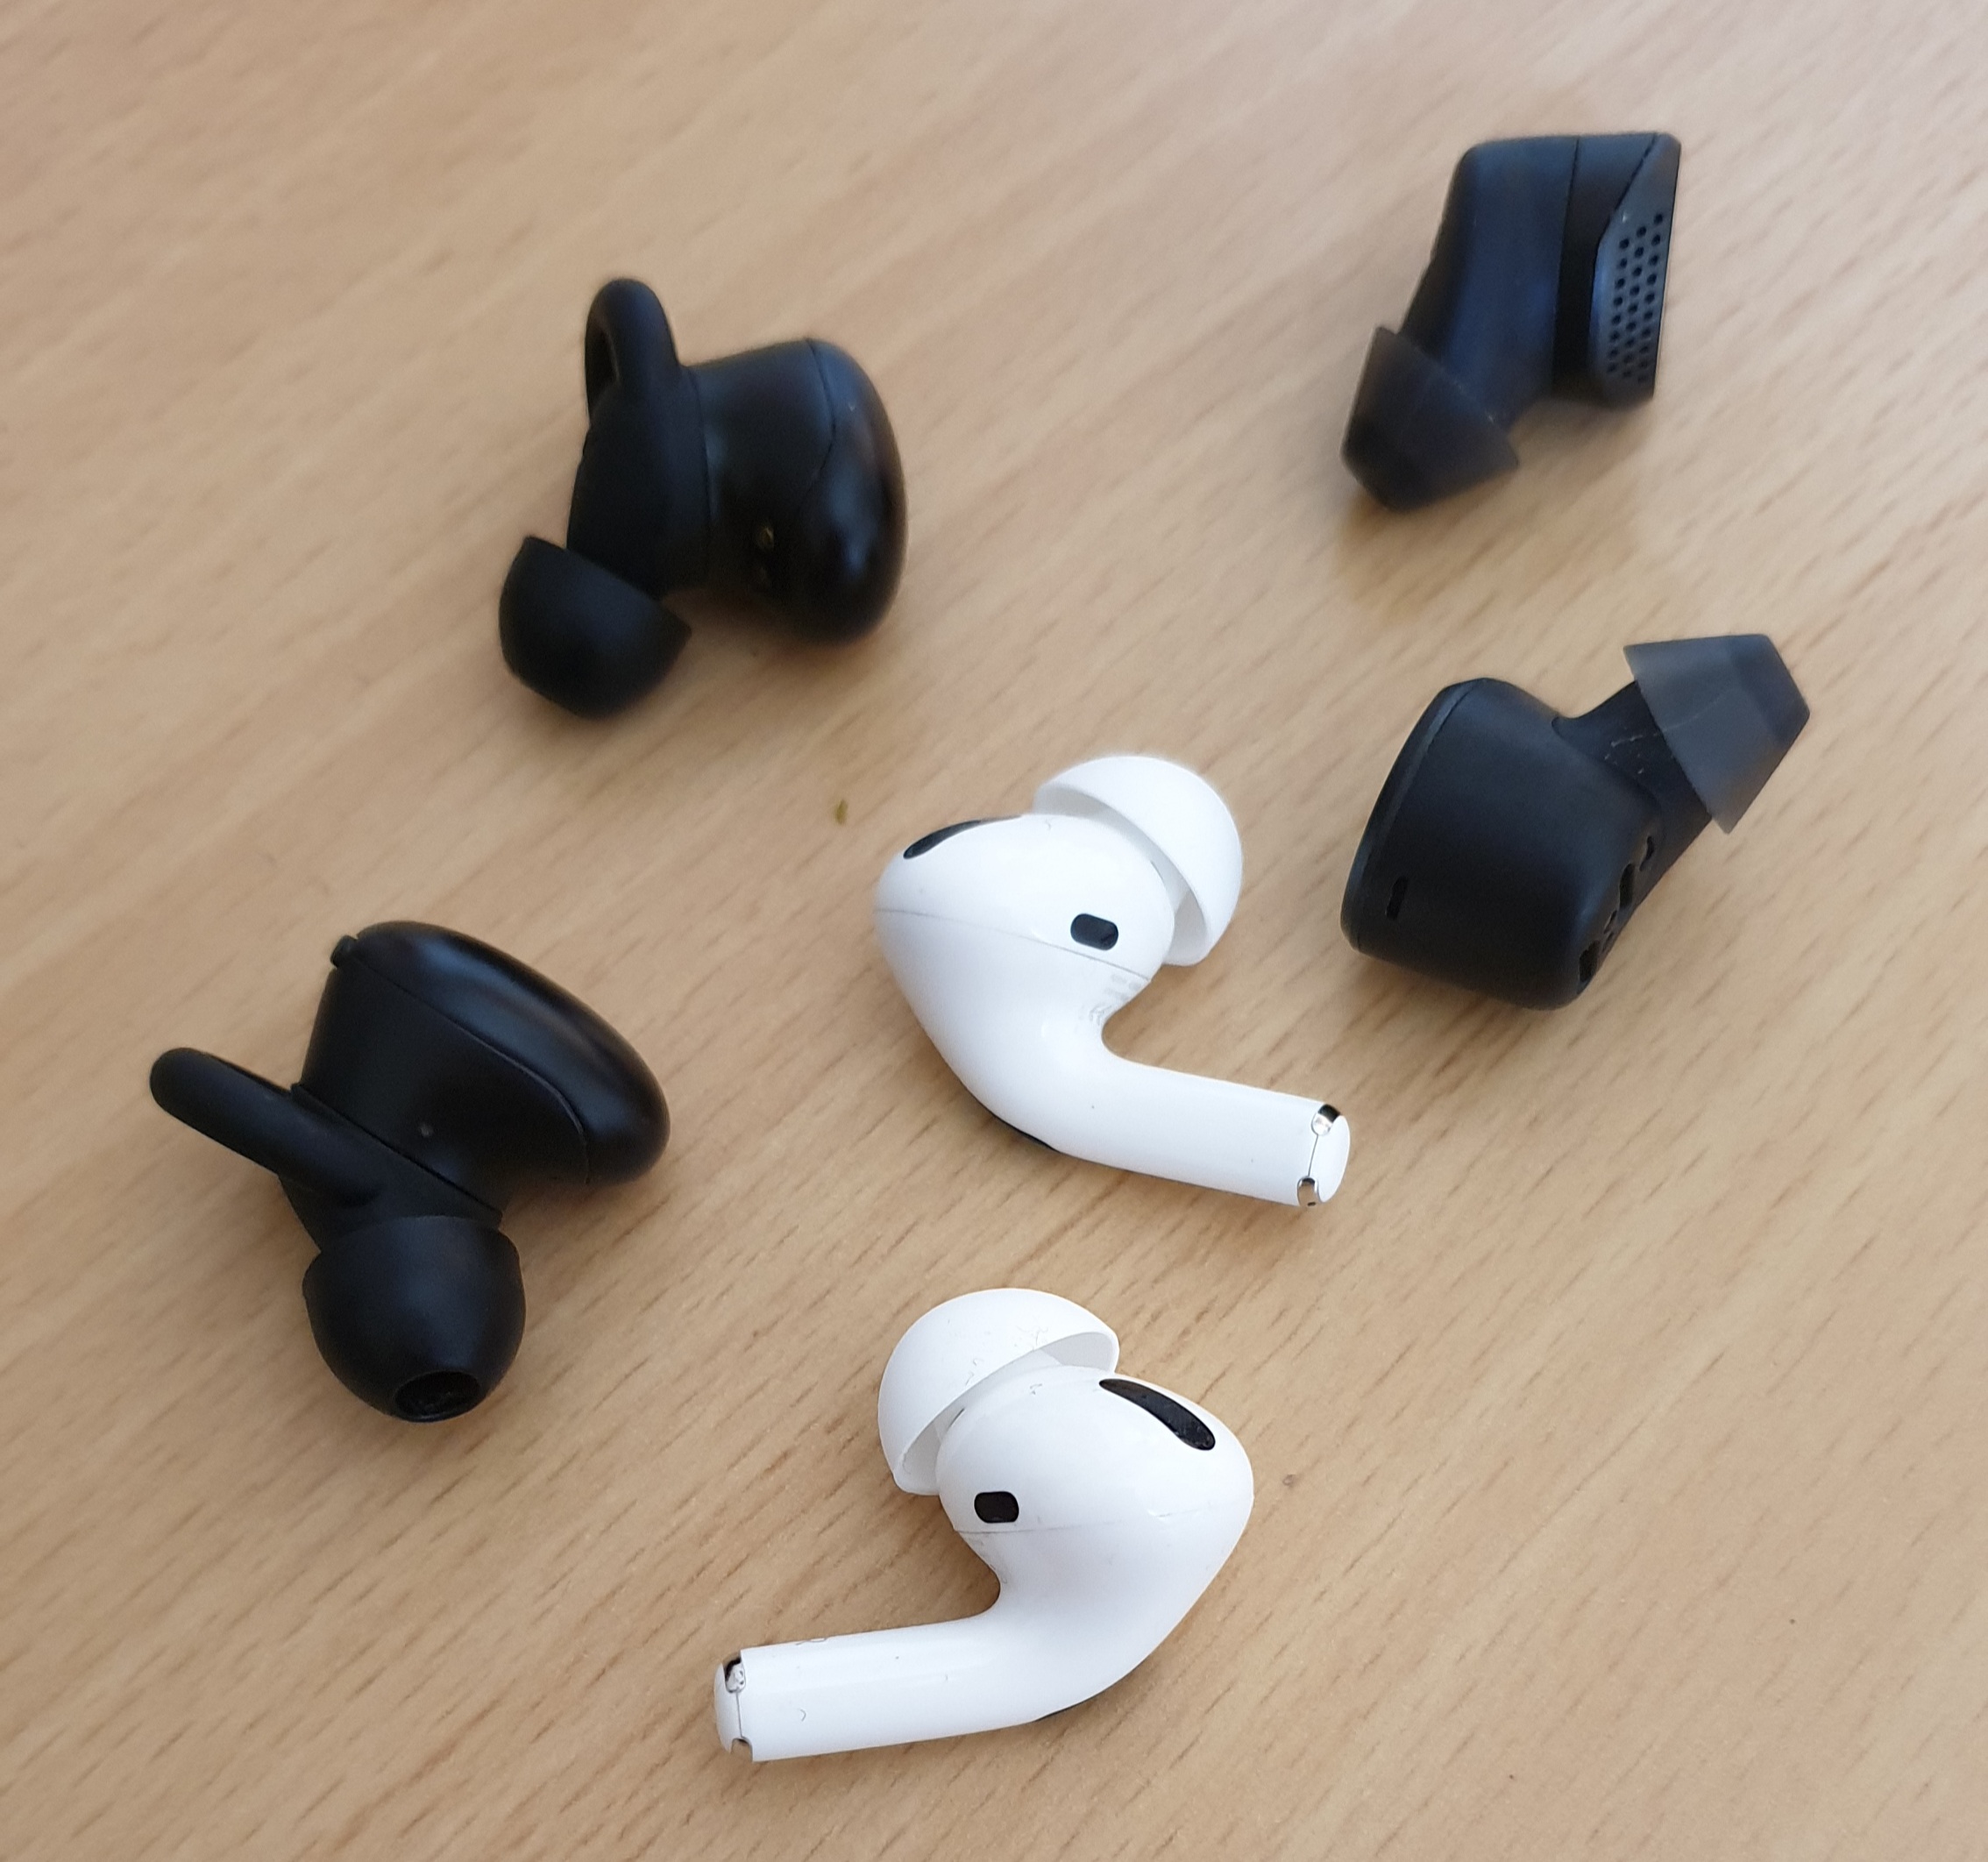 Best Wireless Earbuds – TWS And Noise-canceling